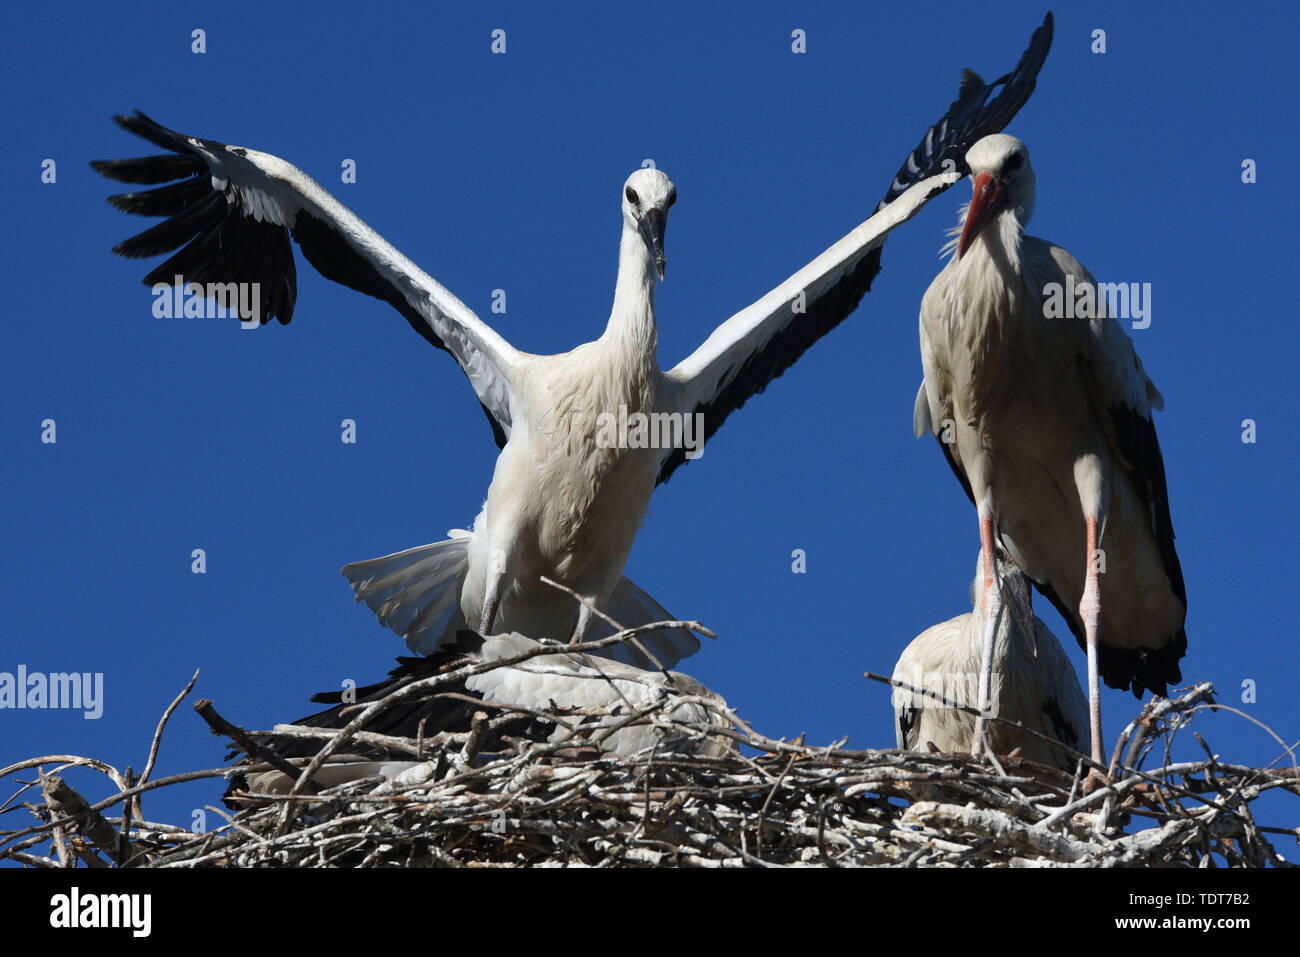 Madrid, Spain. 18th June, 2019. A young white stork tries to fly in its nest in Madrid.The number of white stork chicks born in their nests at Madrid zoo has increased considerably in the last decade due to availability of food. Credit: John Milner/SOPA Images/ZUMA Wire/Alamy Live News Stock Photo